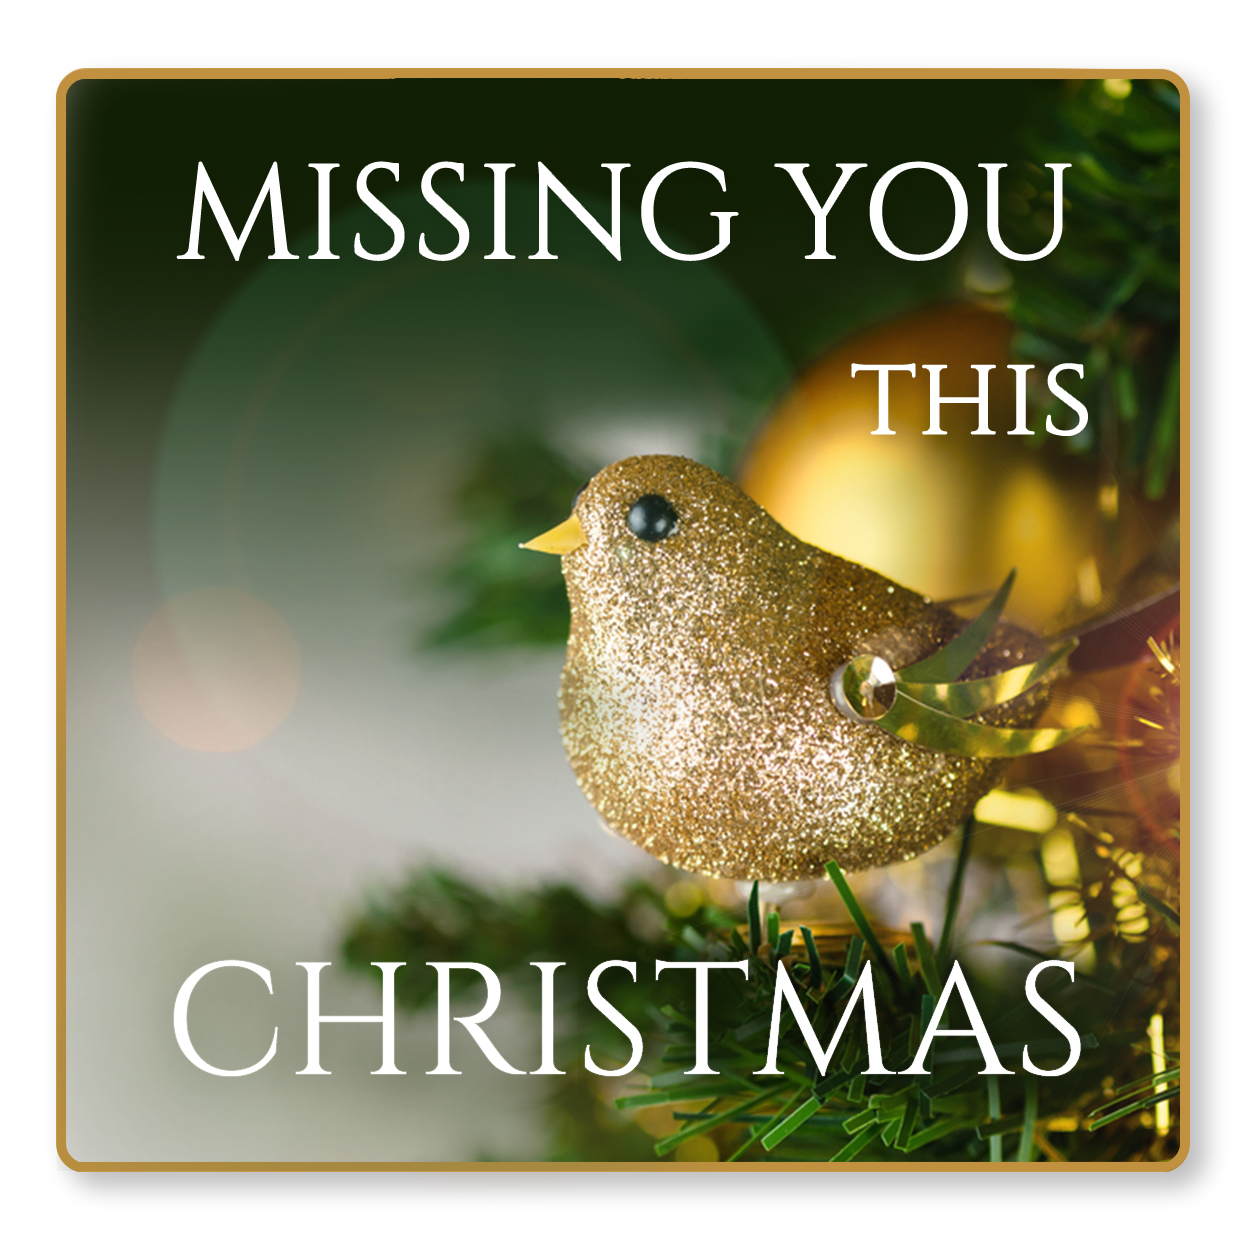 Missing You This Christmas - sent on November 27th, 2022